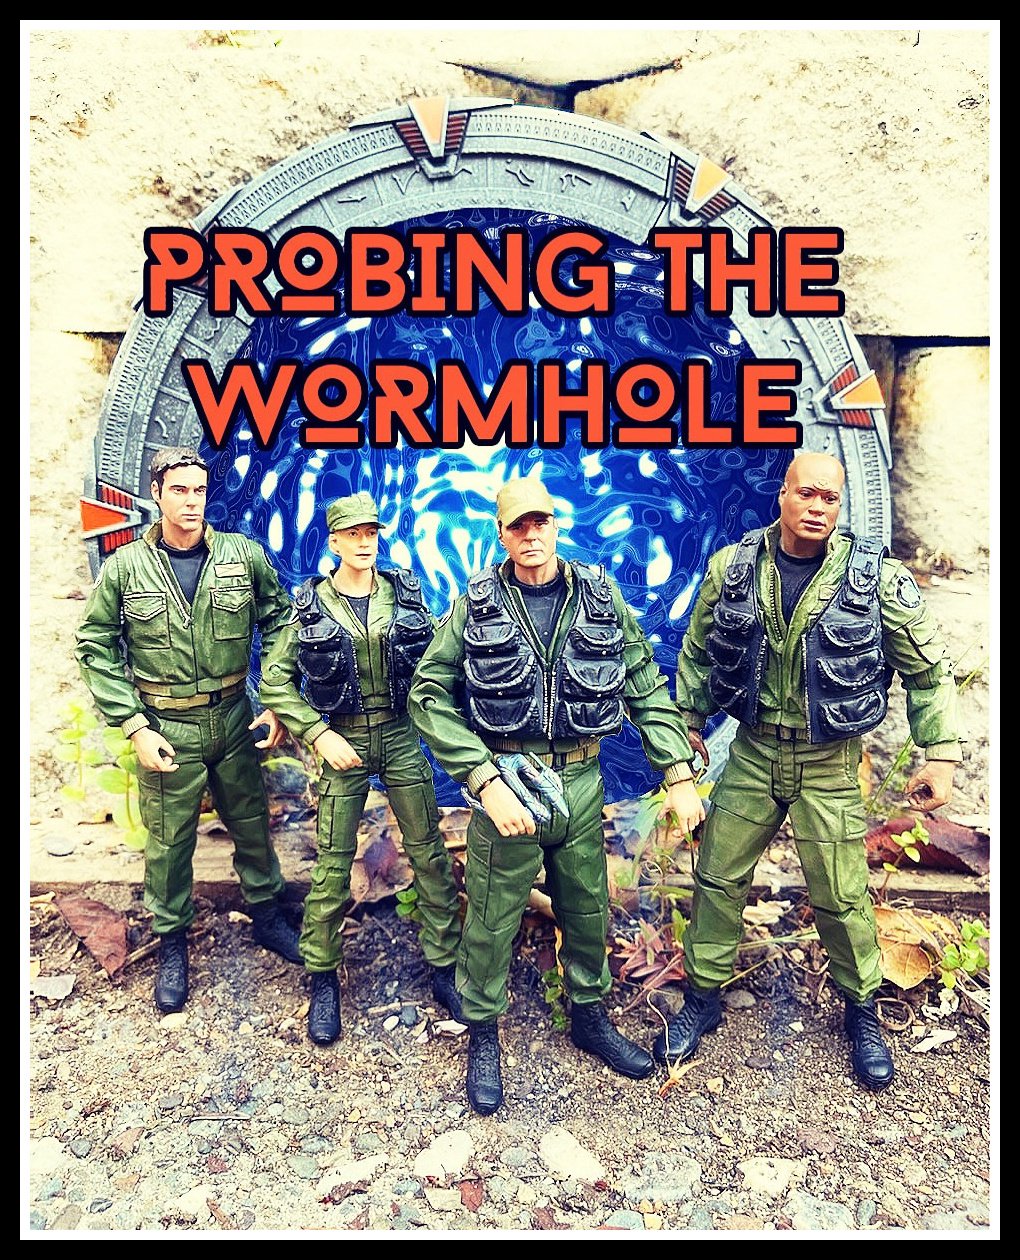 Probing the Wormhole Podcast